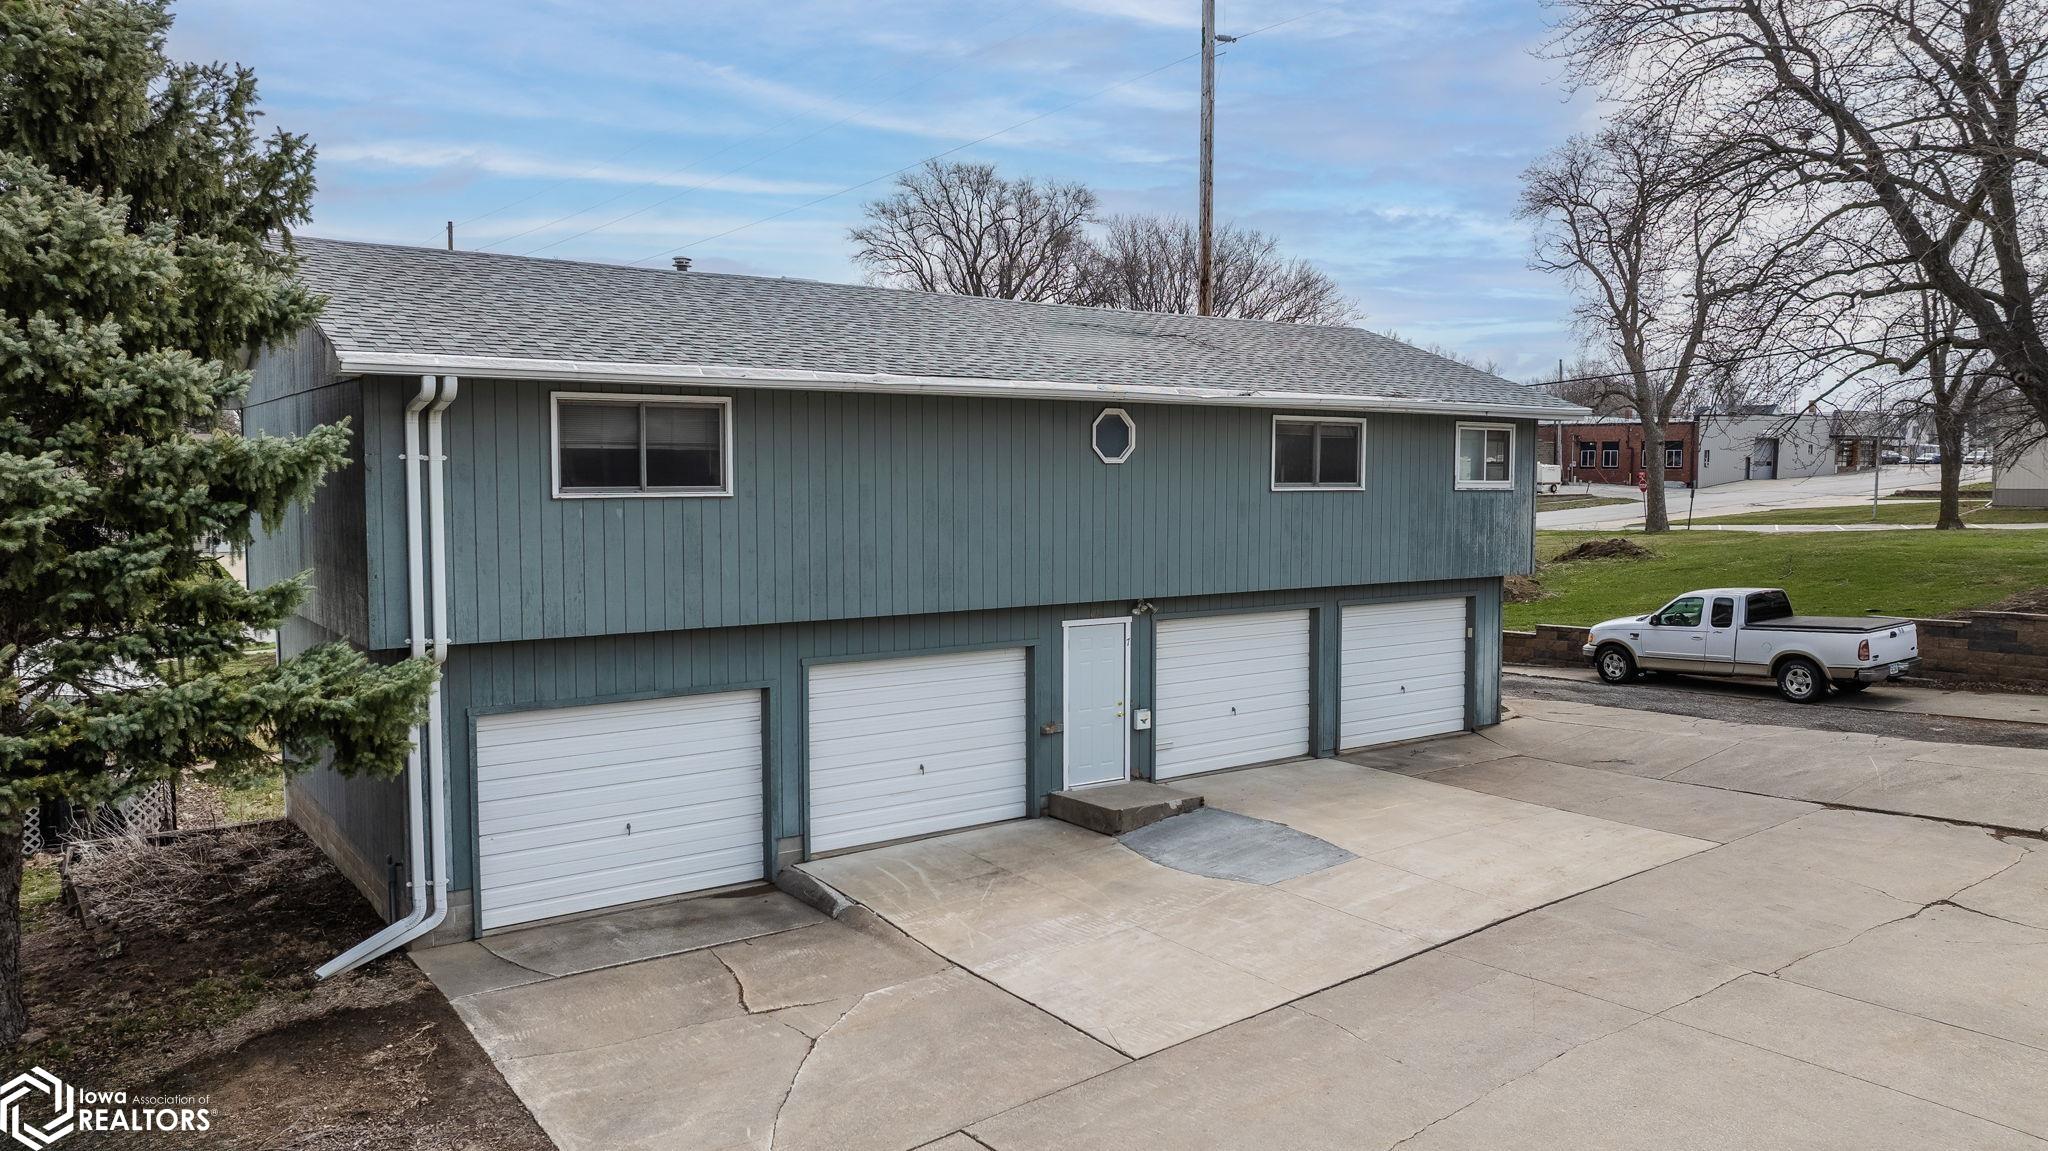 This has 4 garages on ground level and approx. 1,456 SF above which is a 2 bedroom apartment.